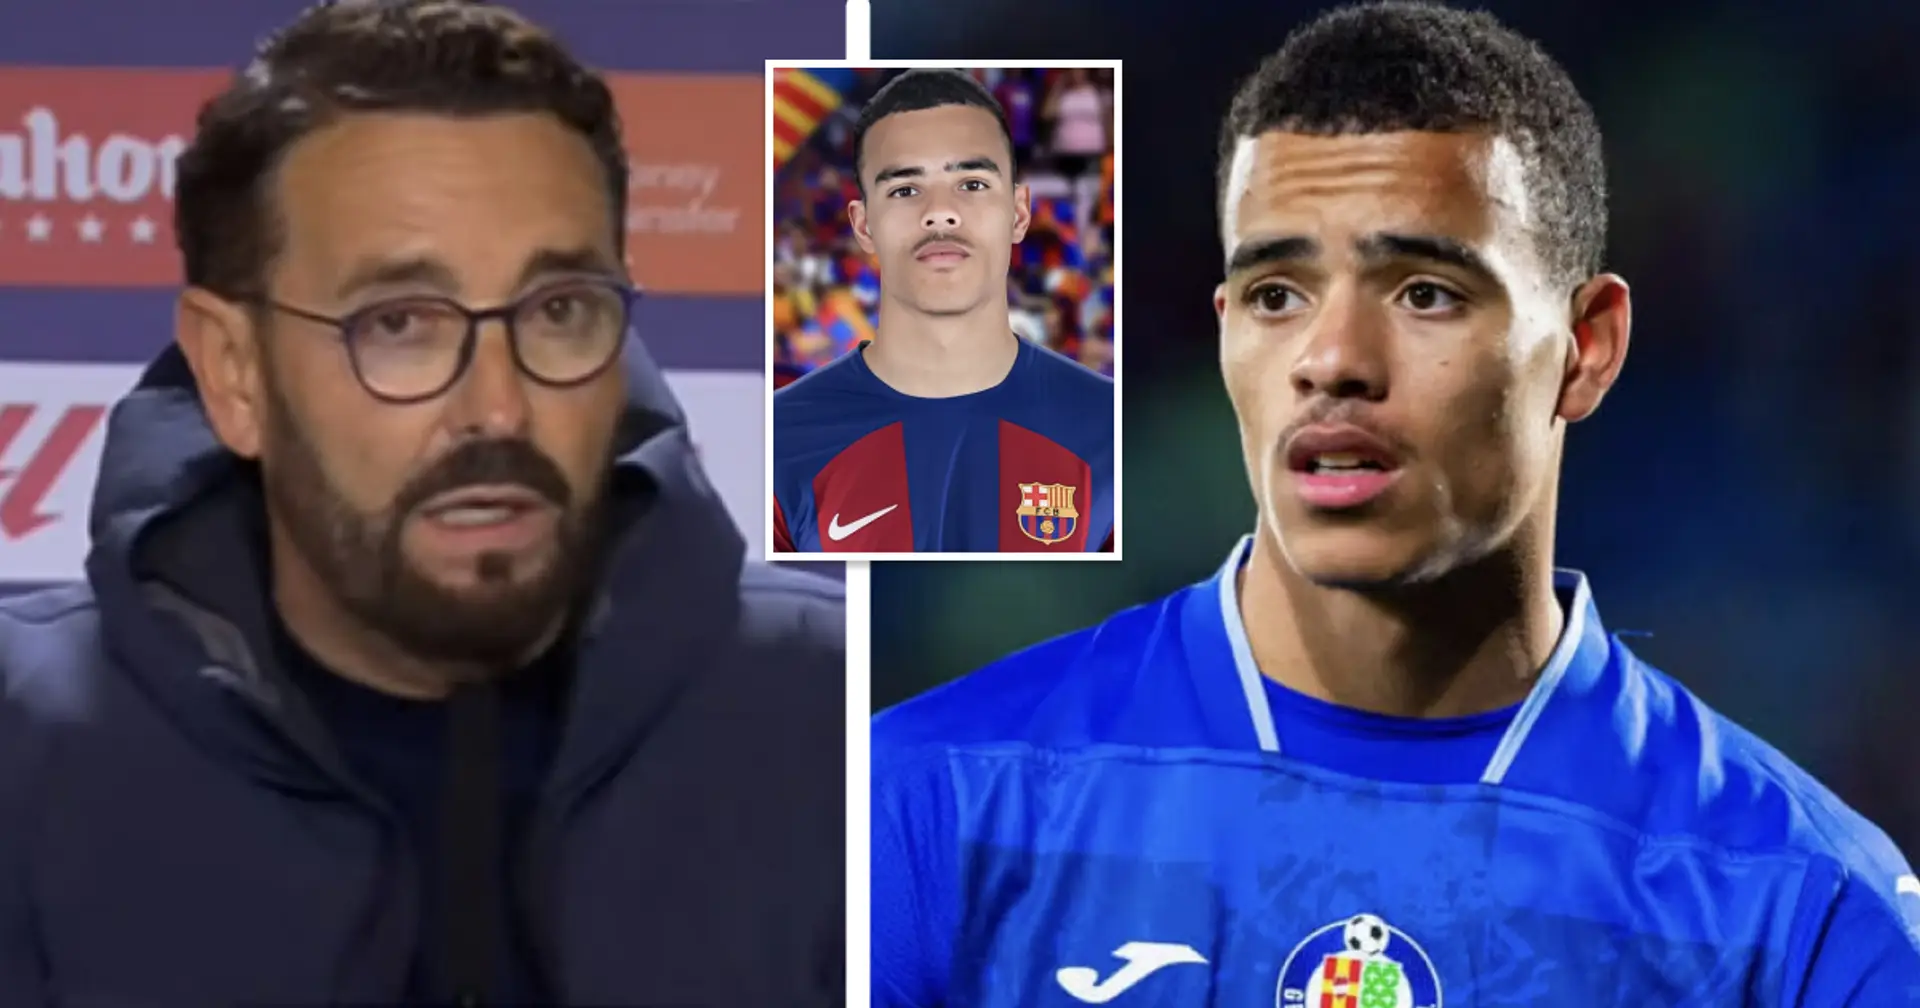 Getafe coach asked if Mason Greenwood can play for Barca one day: 'Talent is not the only thing'